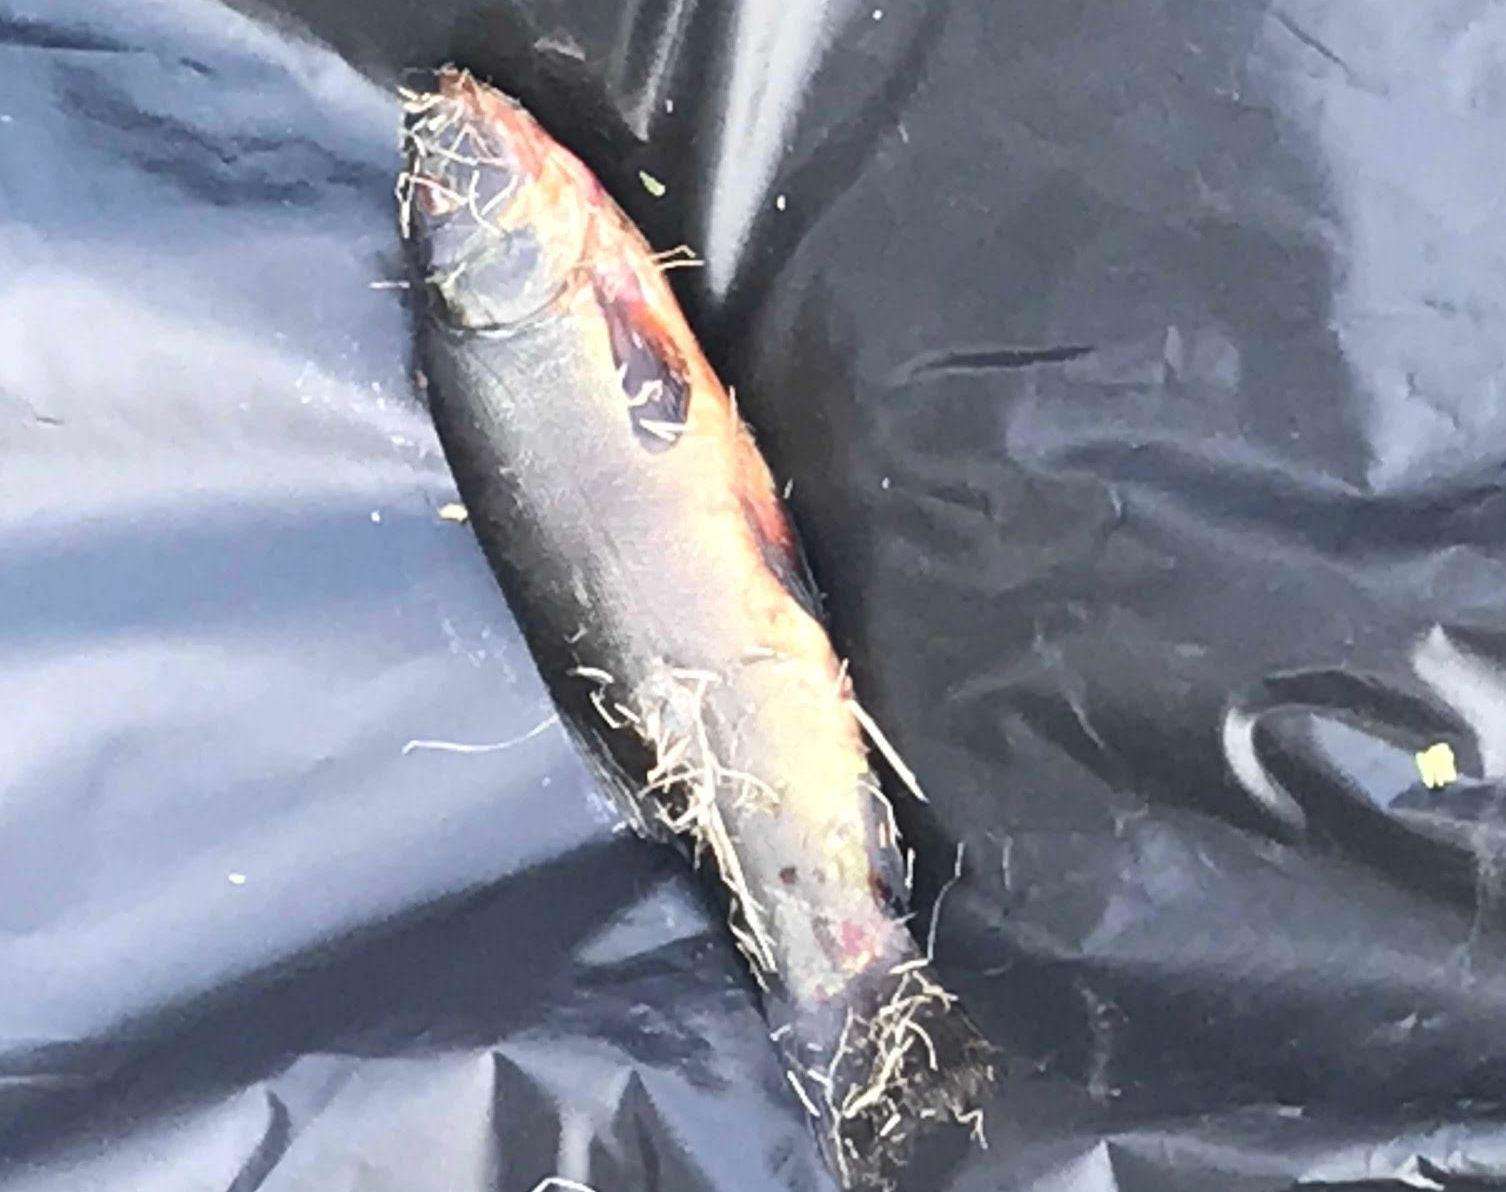 Dead fish from the pond on Eastchurch's Northborough Manor estate (4513256)